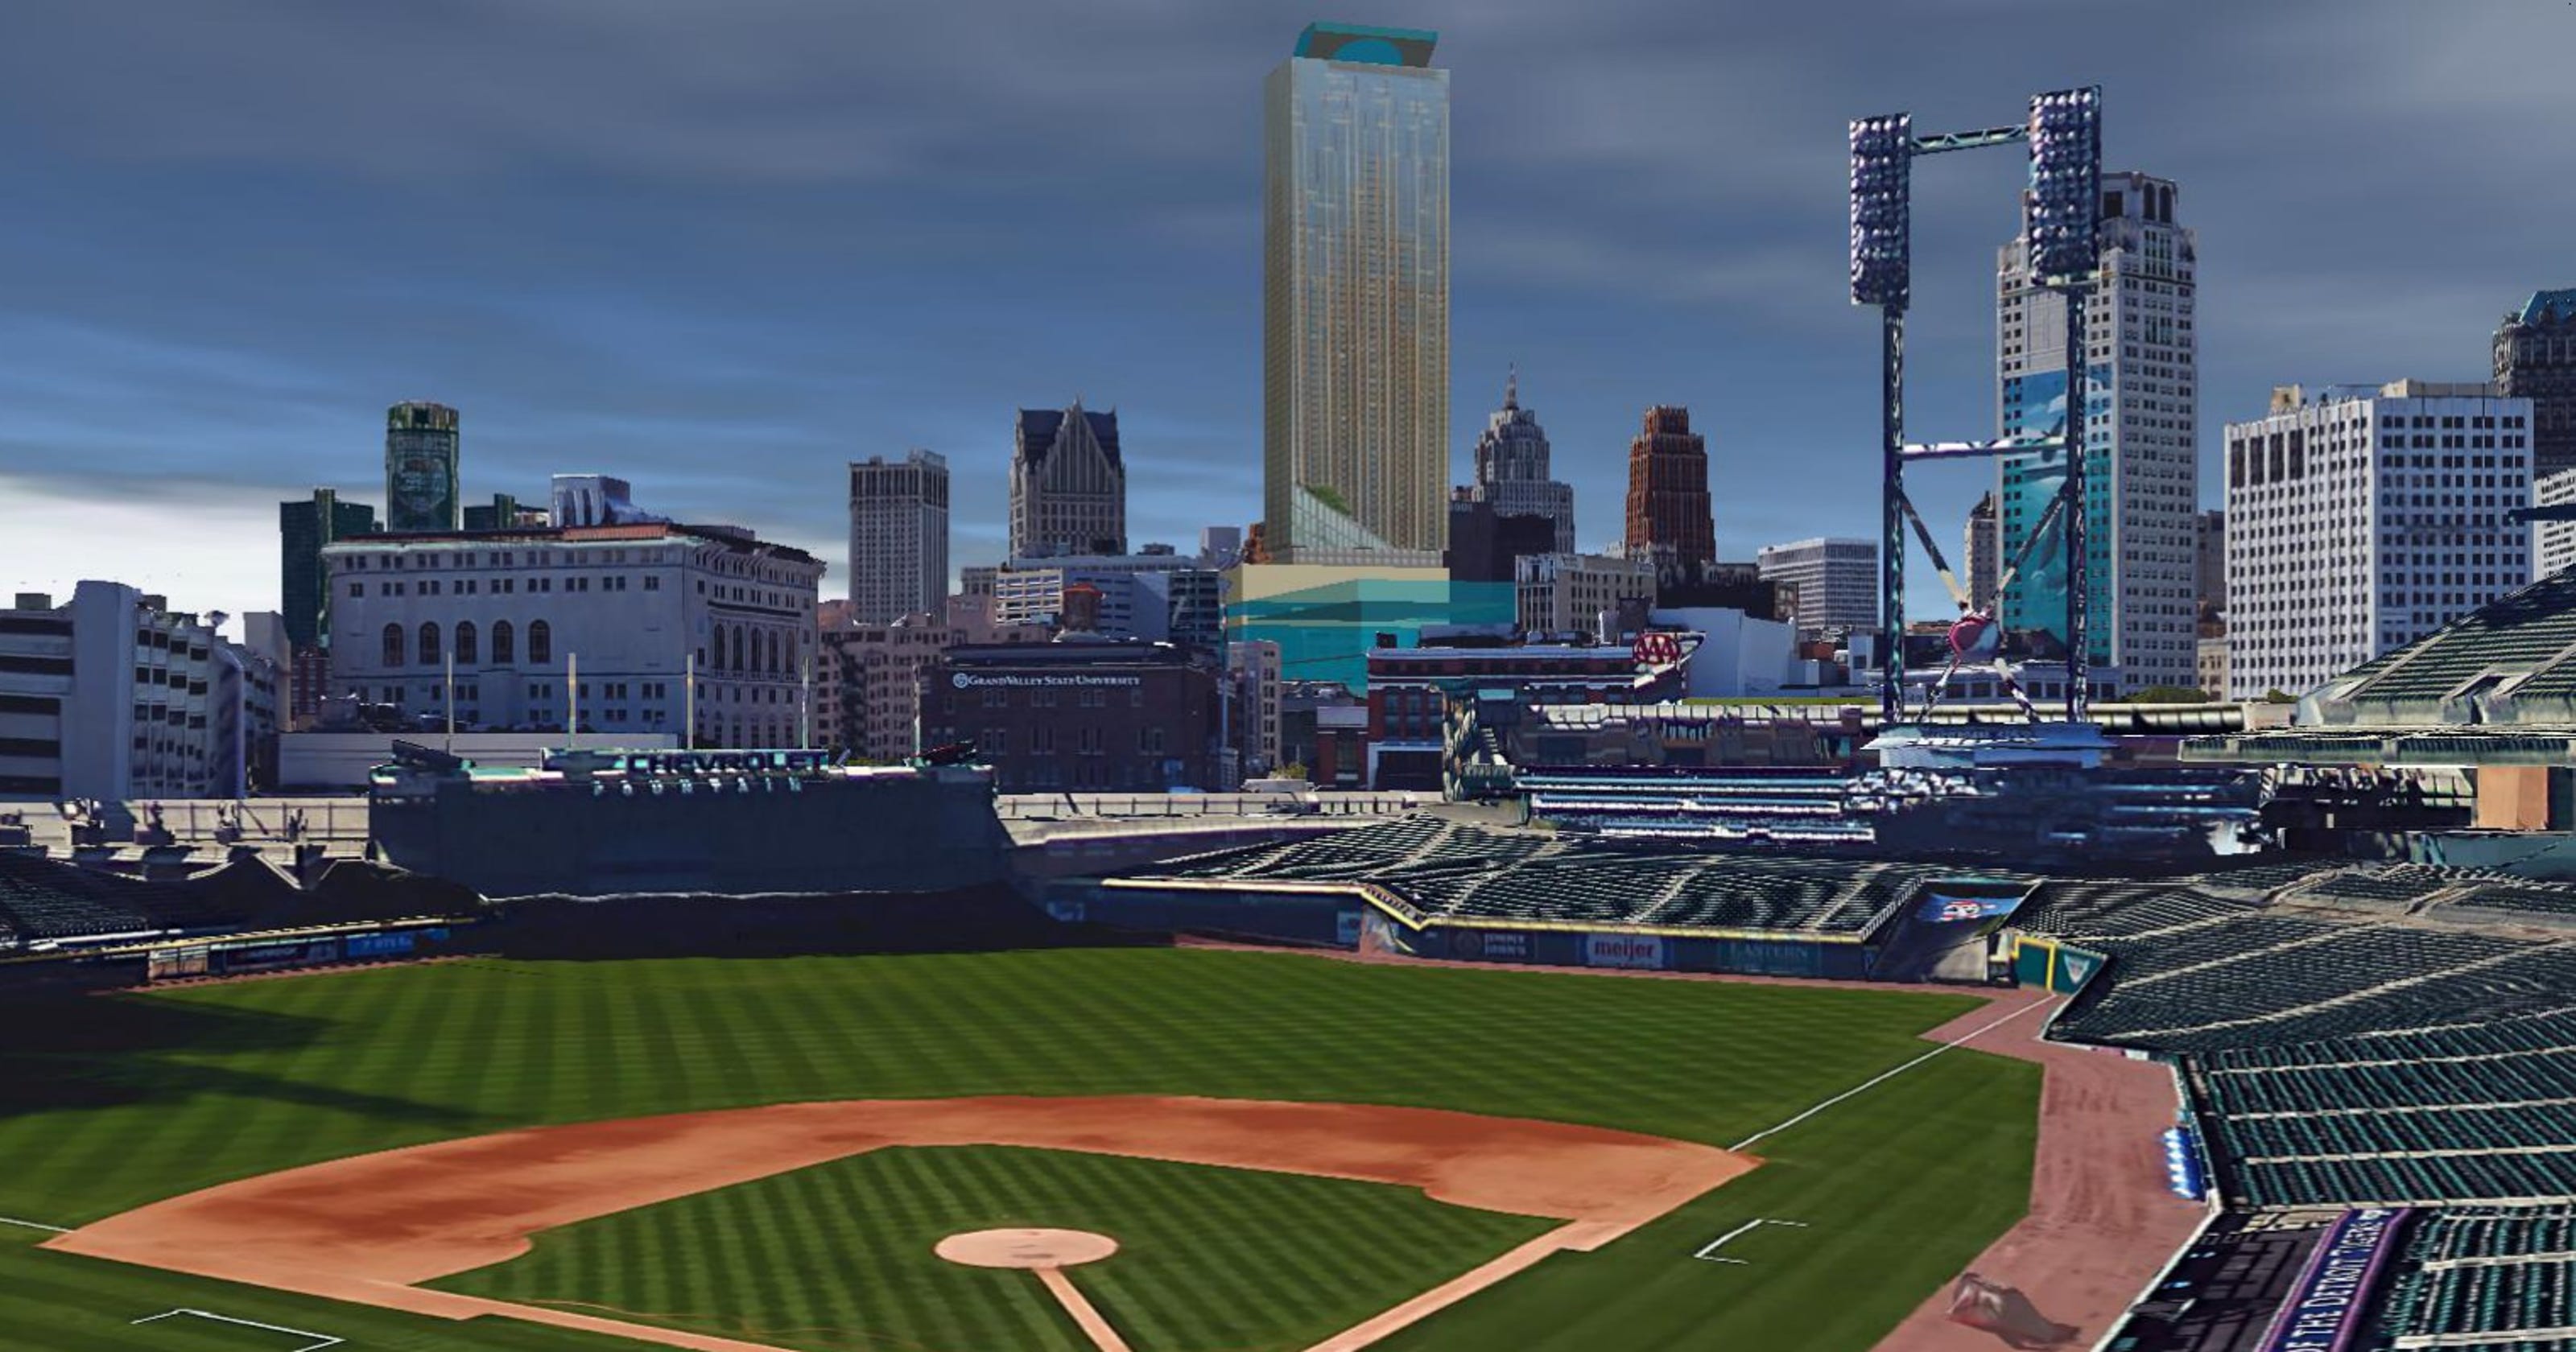 Here's what Detroit's skyline would look like with Hudson's tower